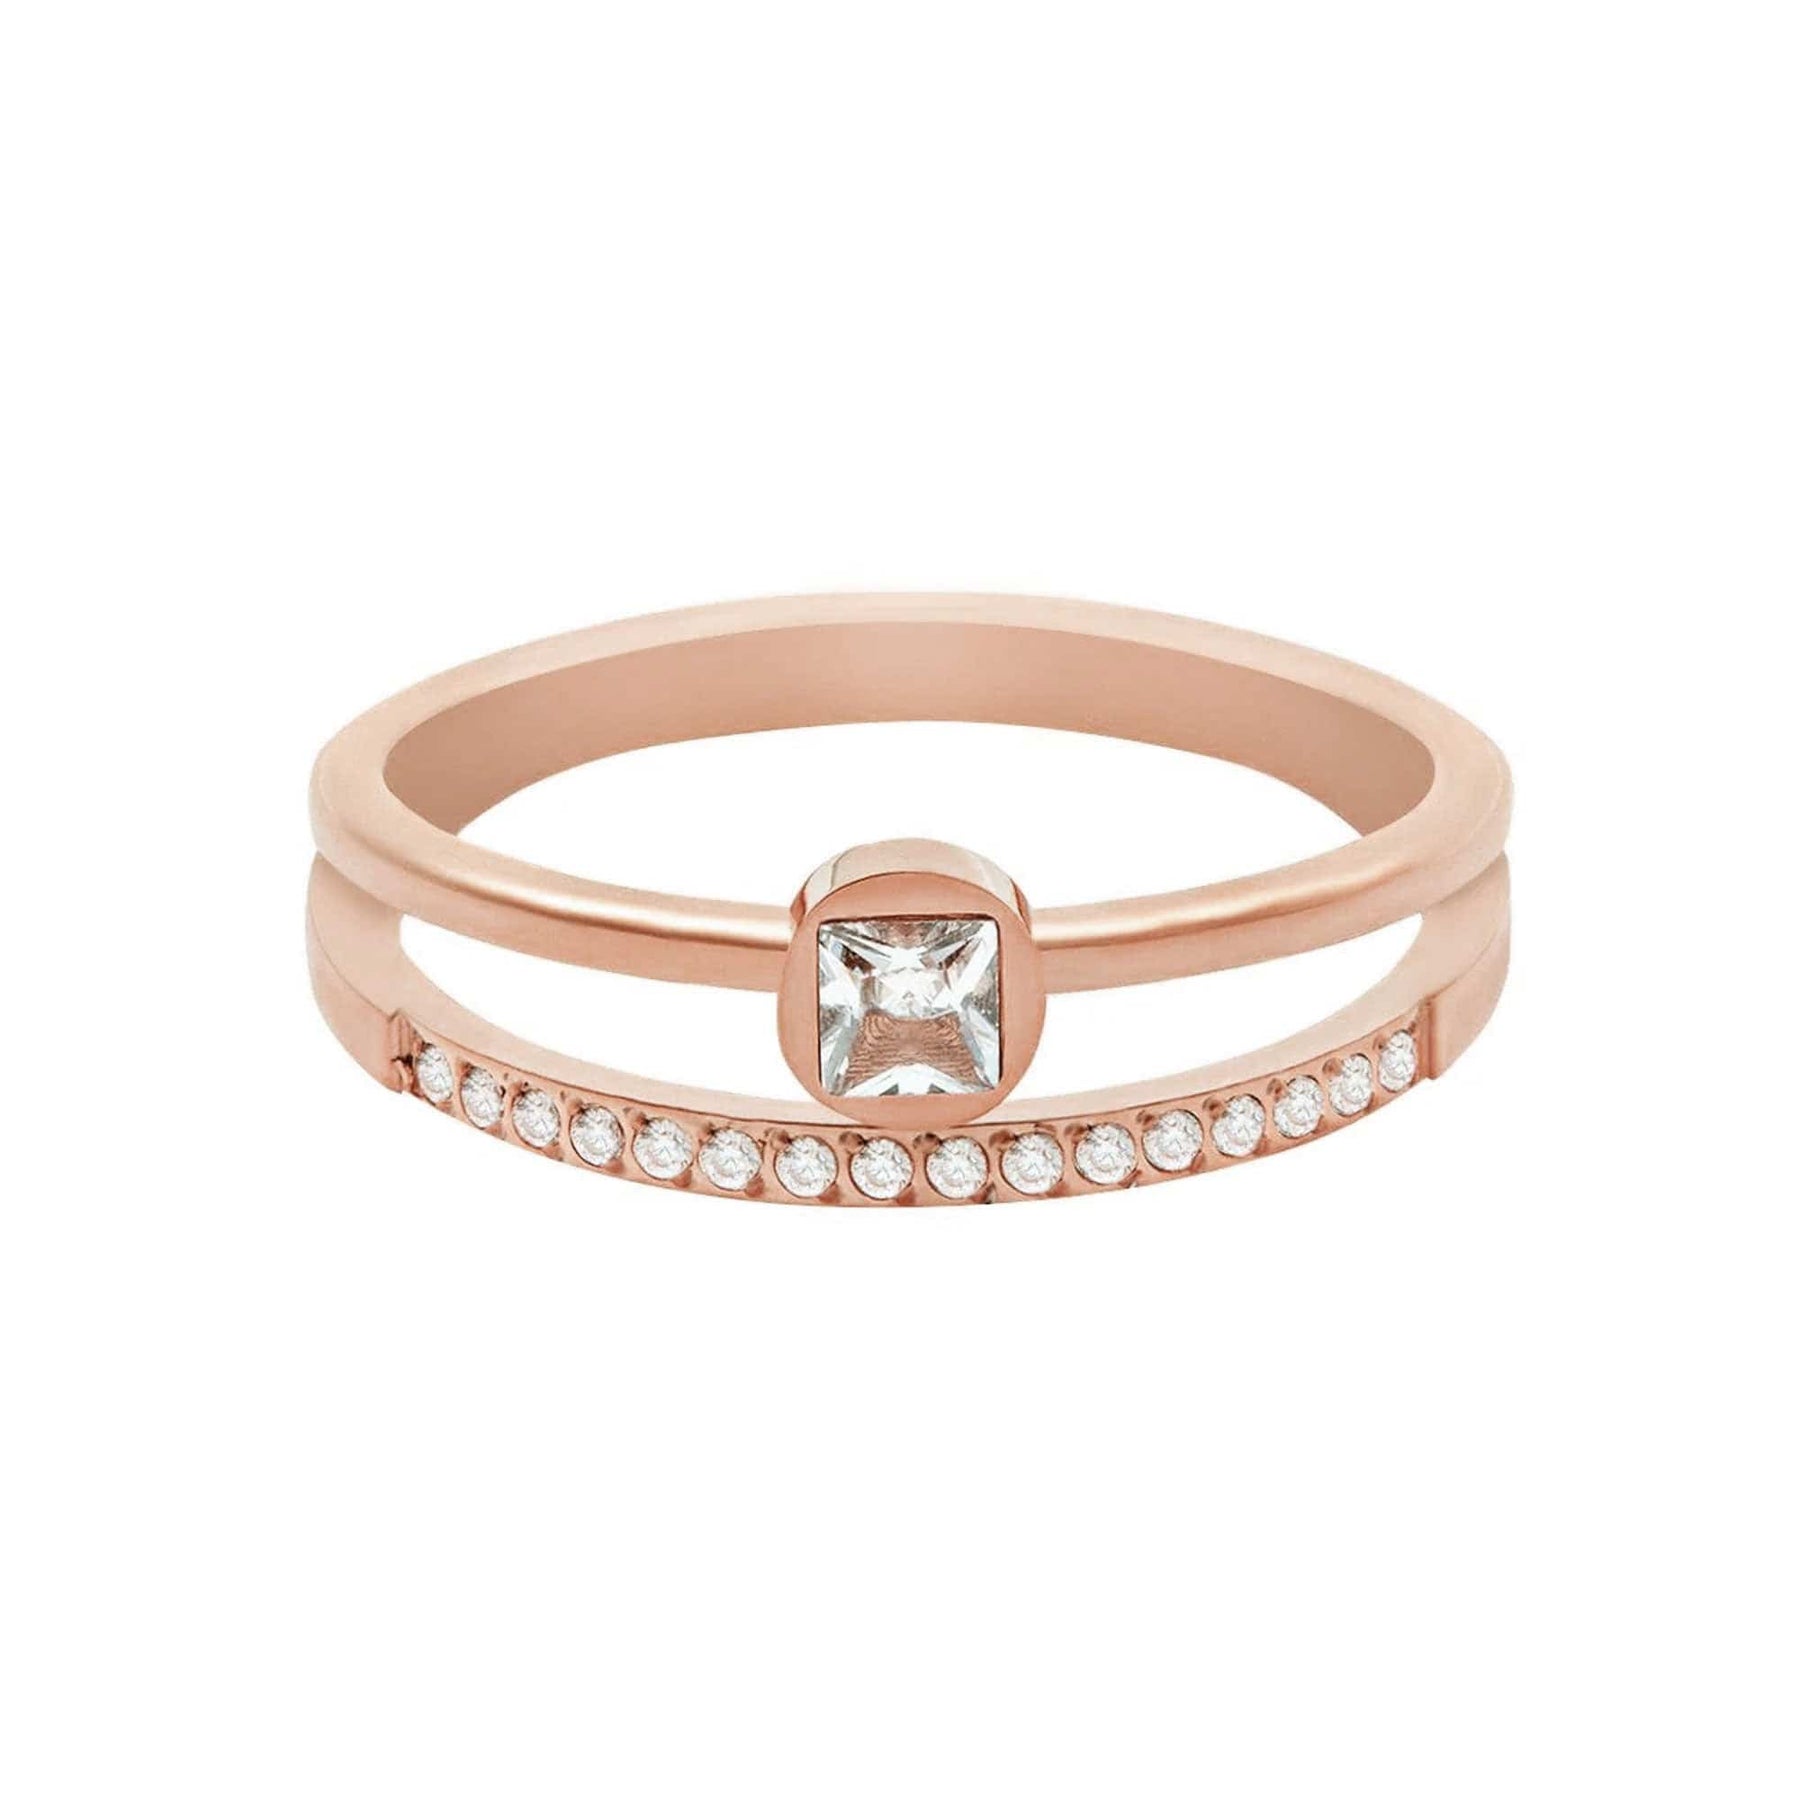 BohoMoon Stainless Steel Briony Ring Rose Gold / US 4 / UK H / EUR 46 / (xxsmall)